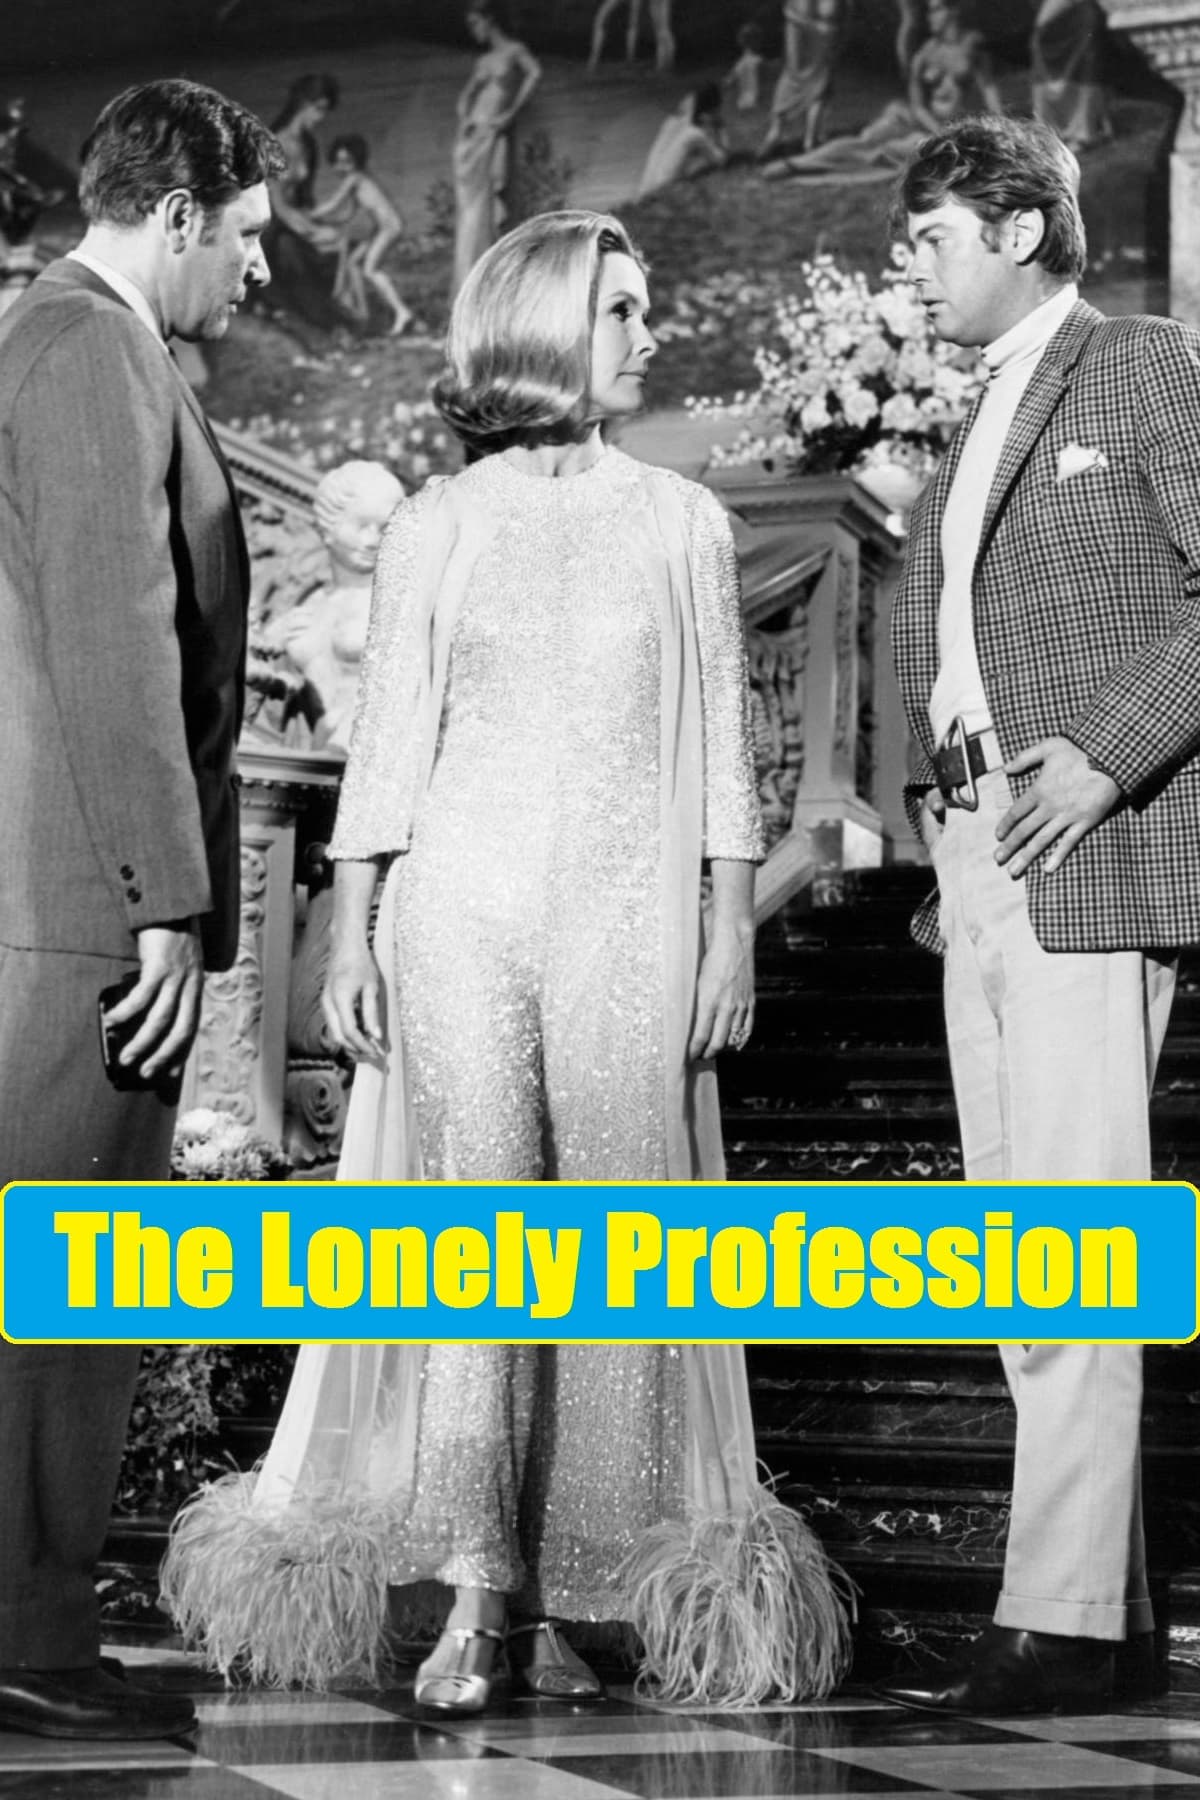 The Lonely Profession